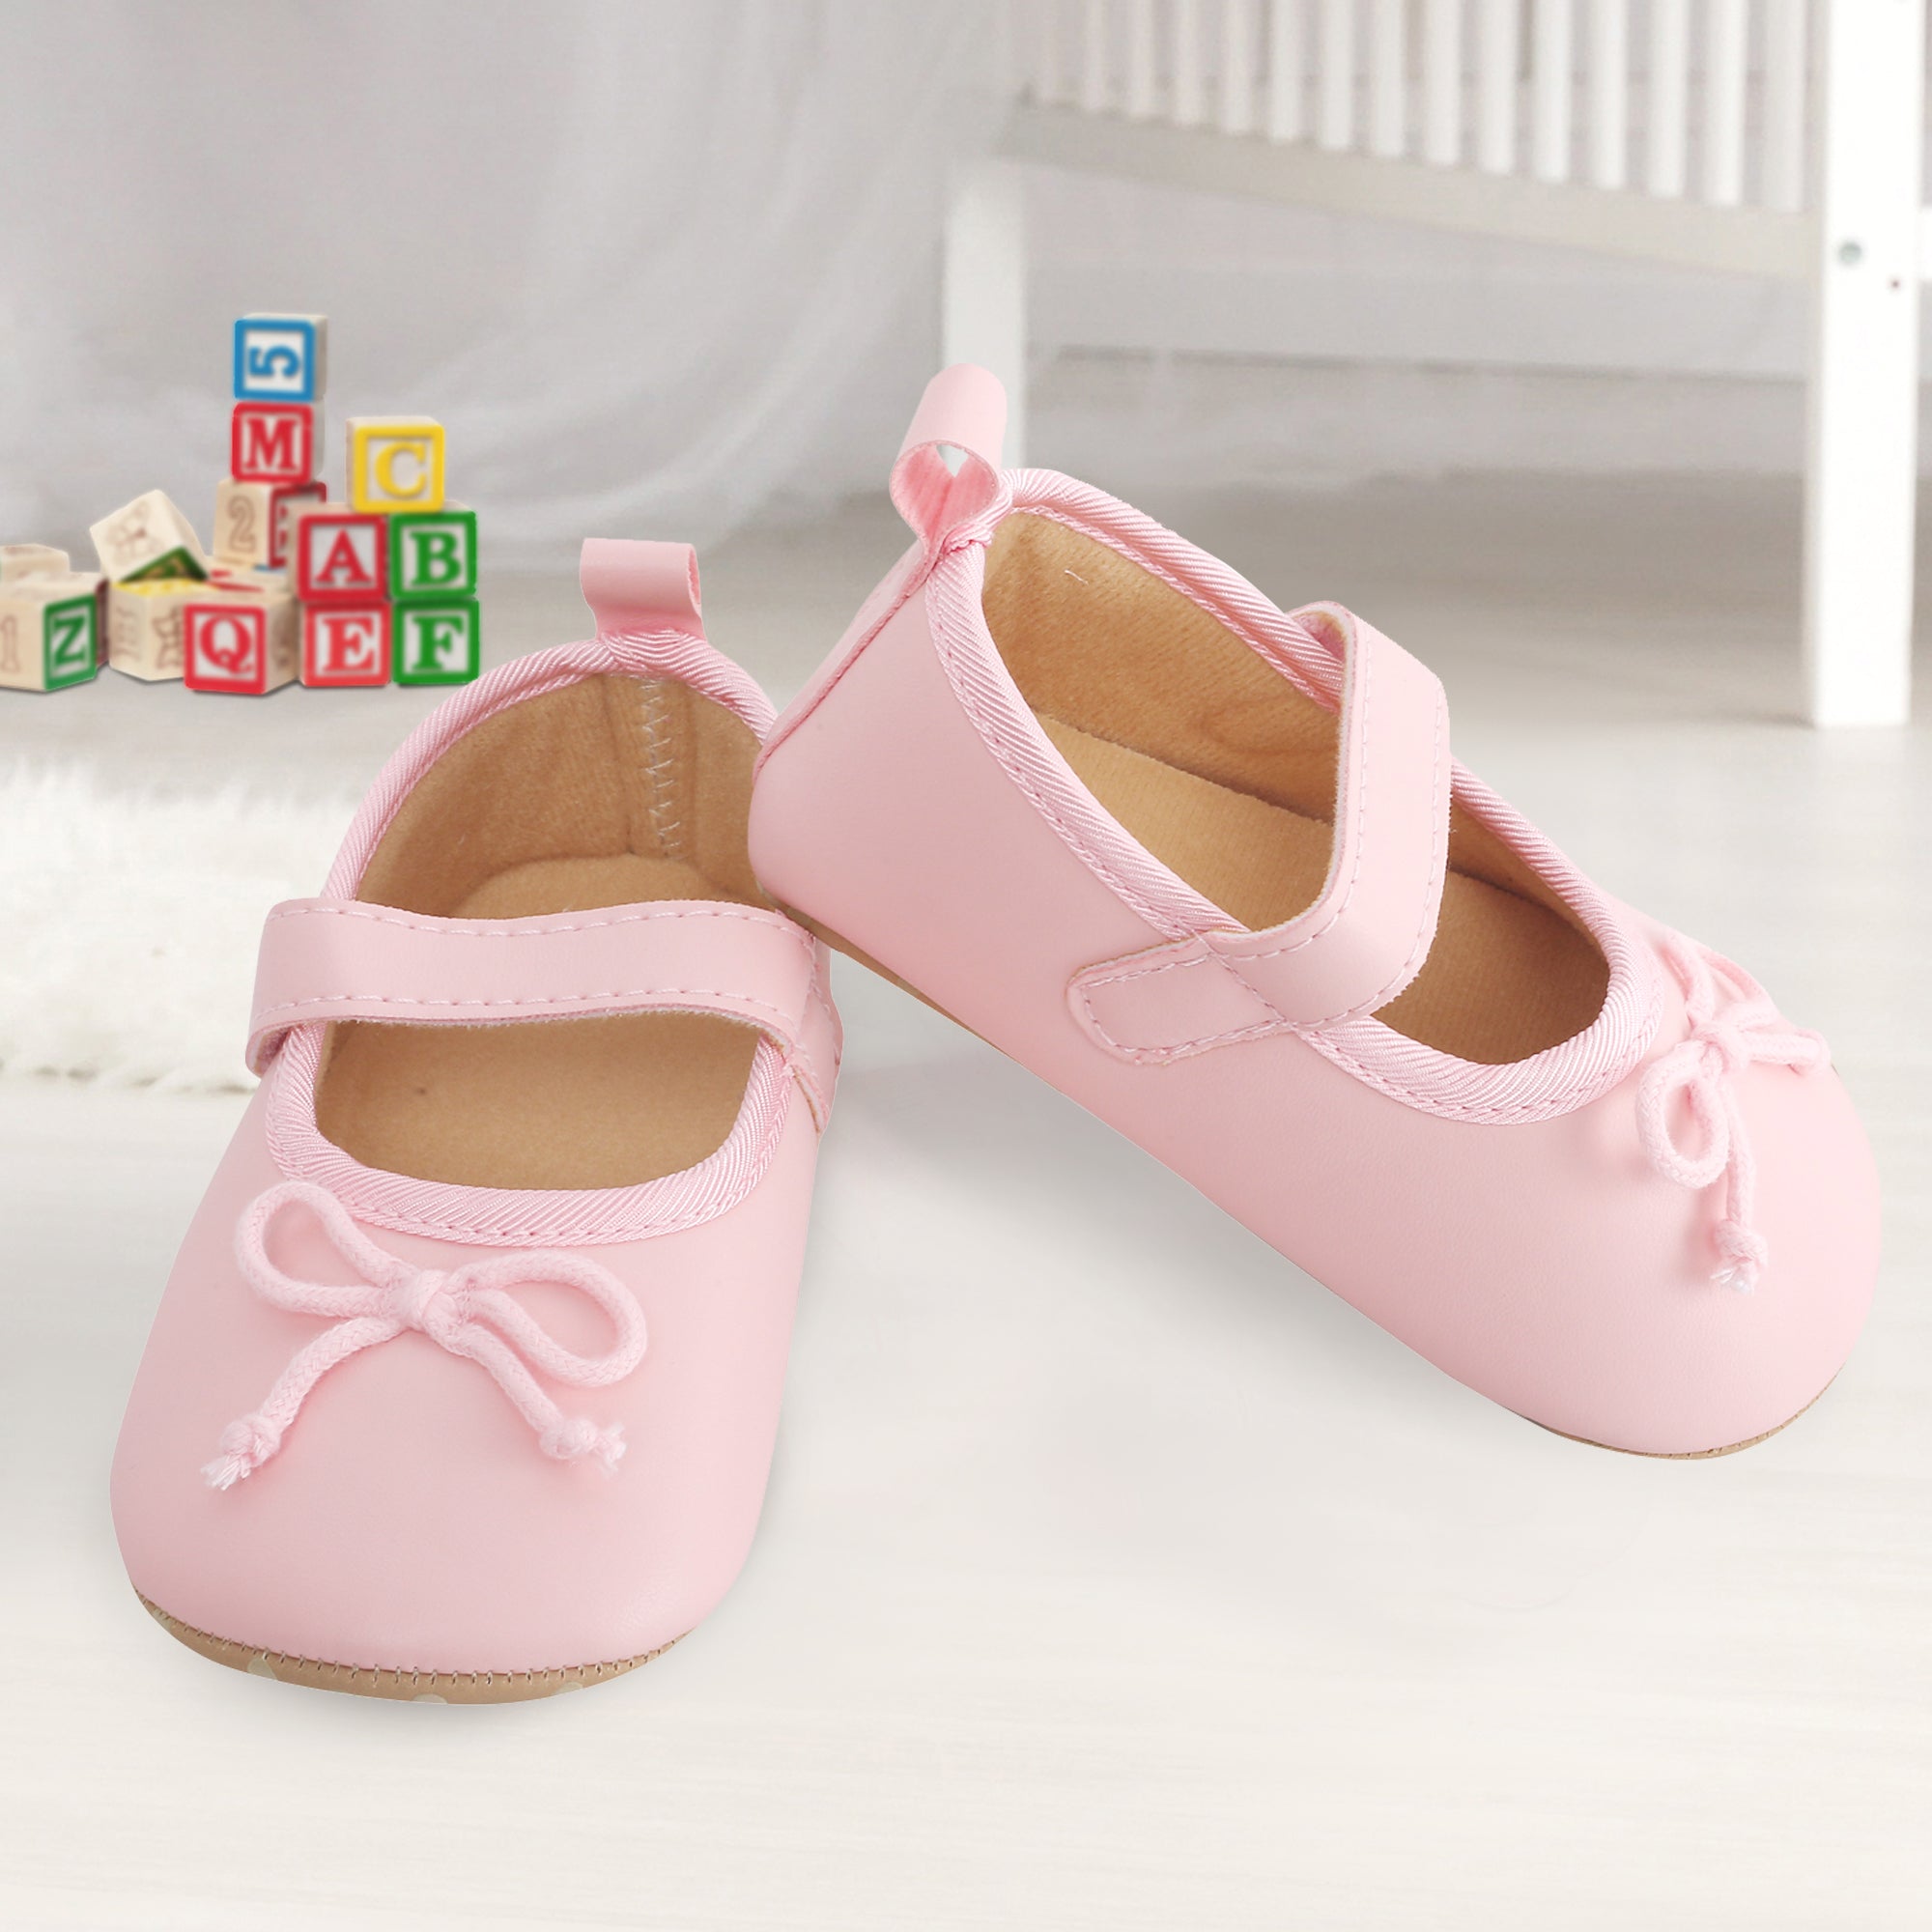 Baby Moo Dressy Bow Pink Booties